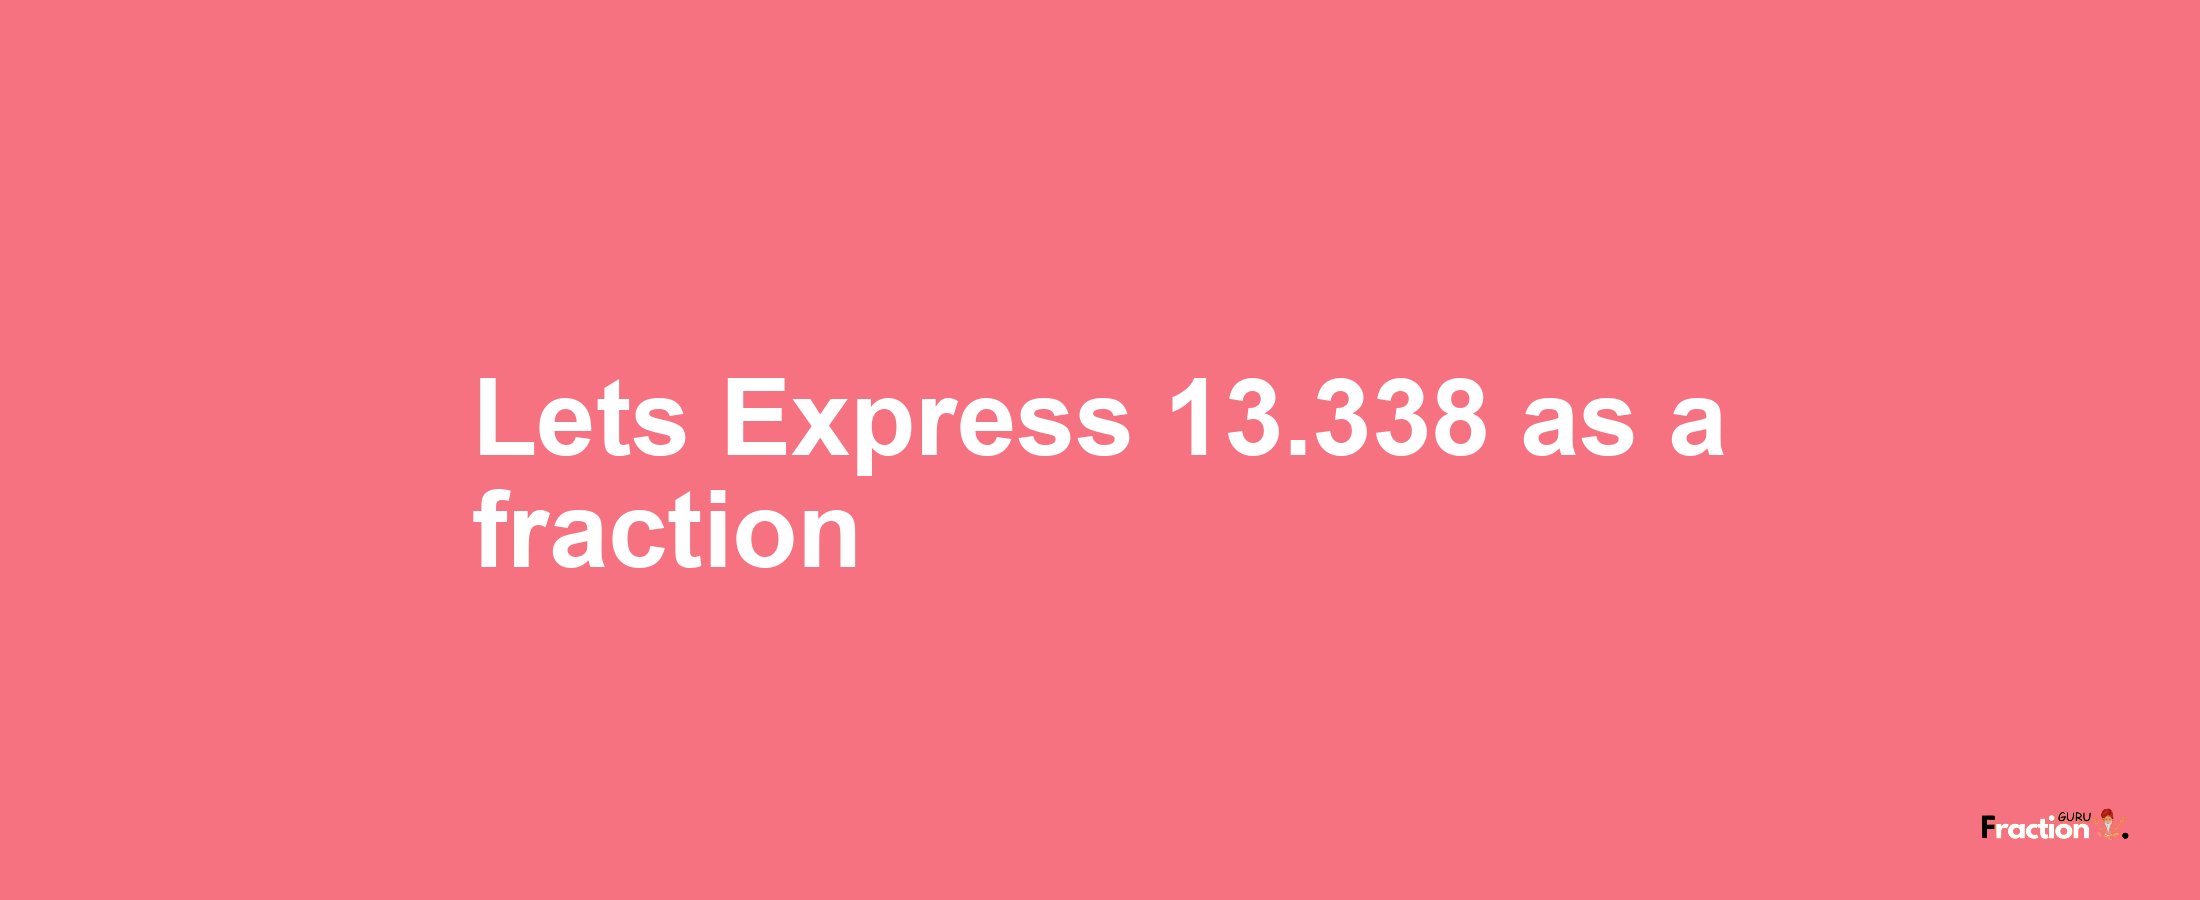 Lets Express 13.338 as afraction